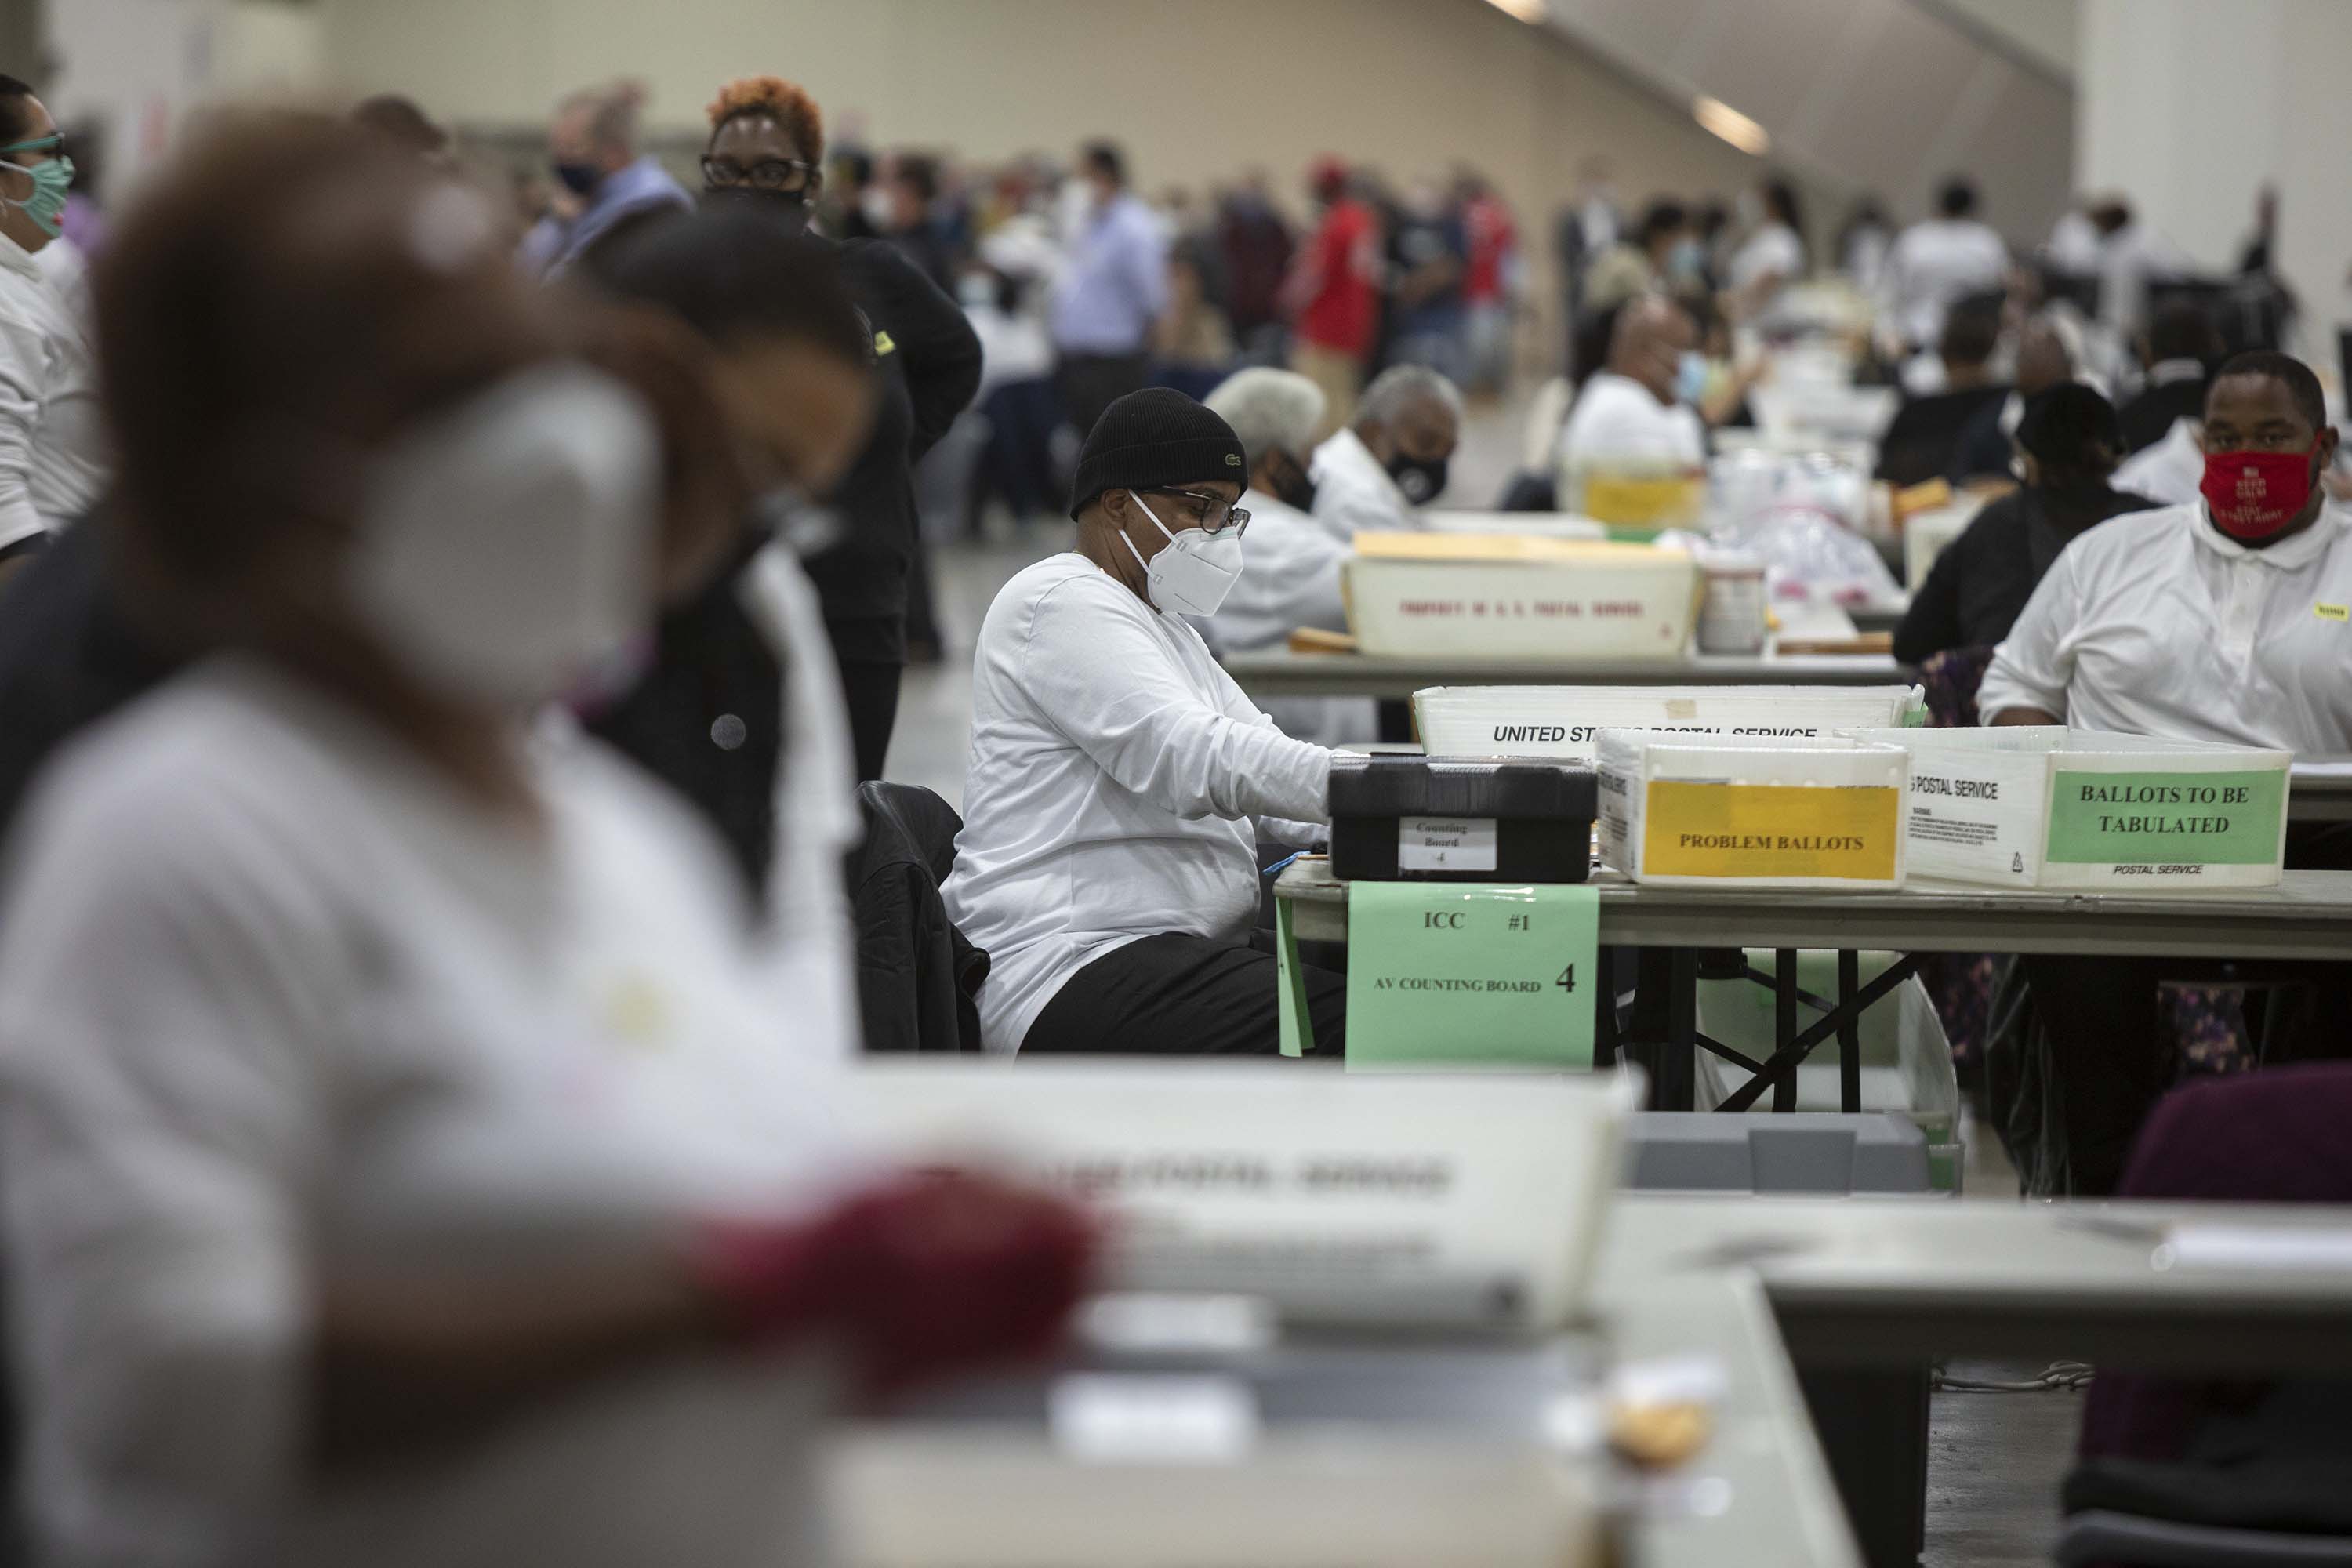 Workers with the Detroit Department of Elections process ballots at the Central Counting Board in Detroit, Michigan on November 4.